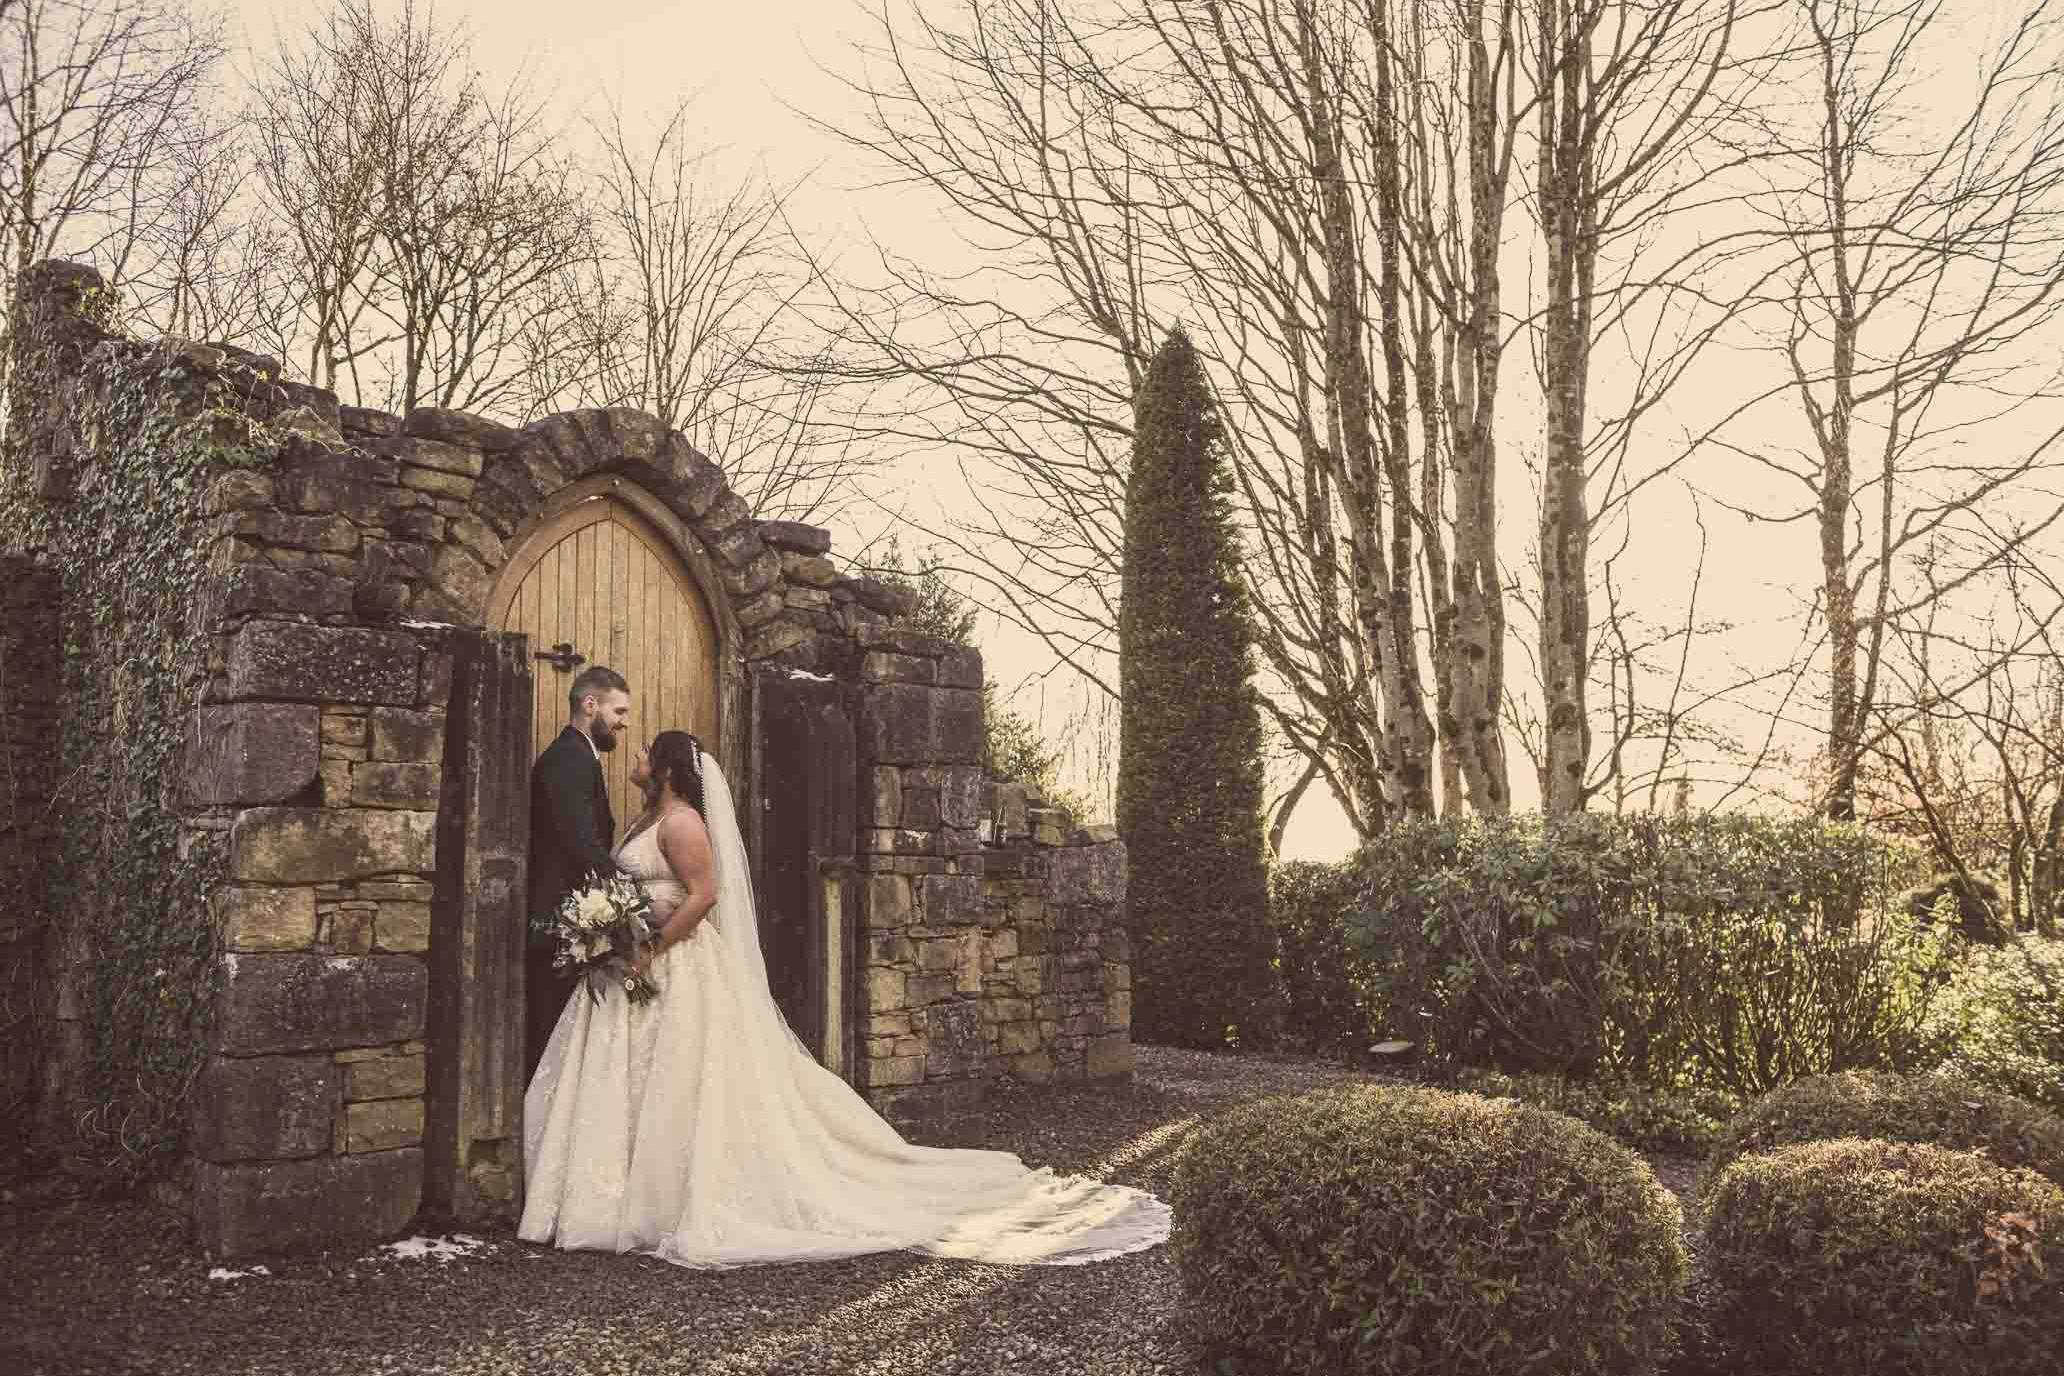 Victoria & Ryan embracing at the ruin in Slieve Russell Hotel